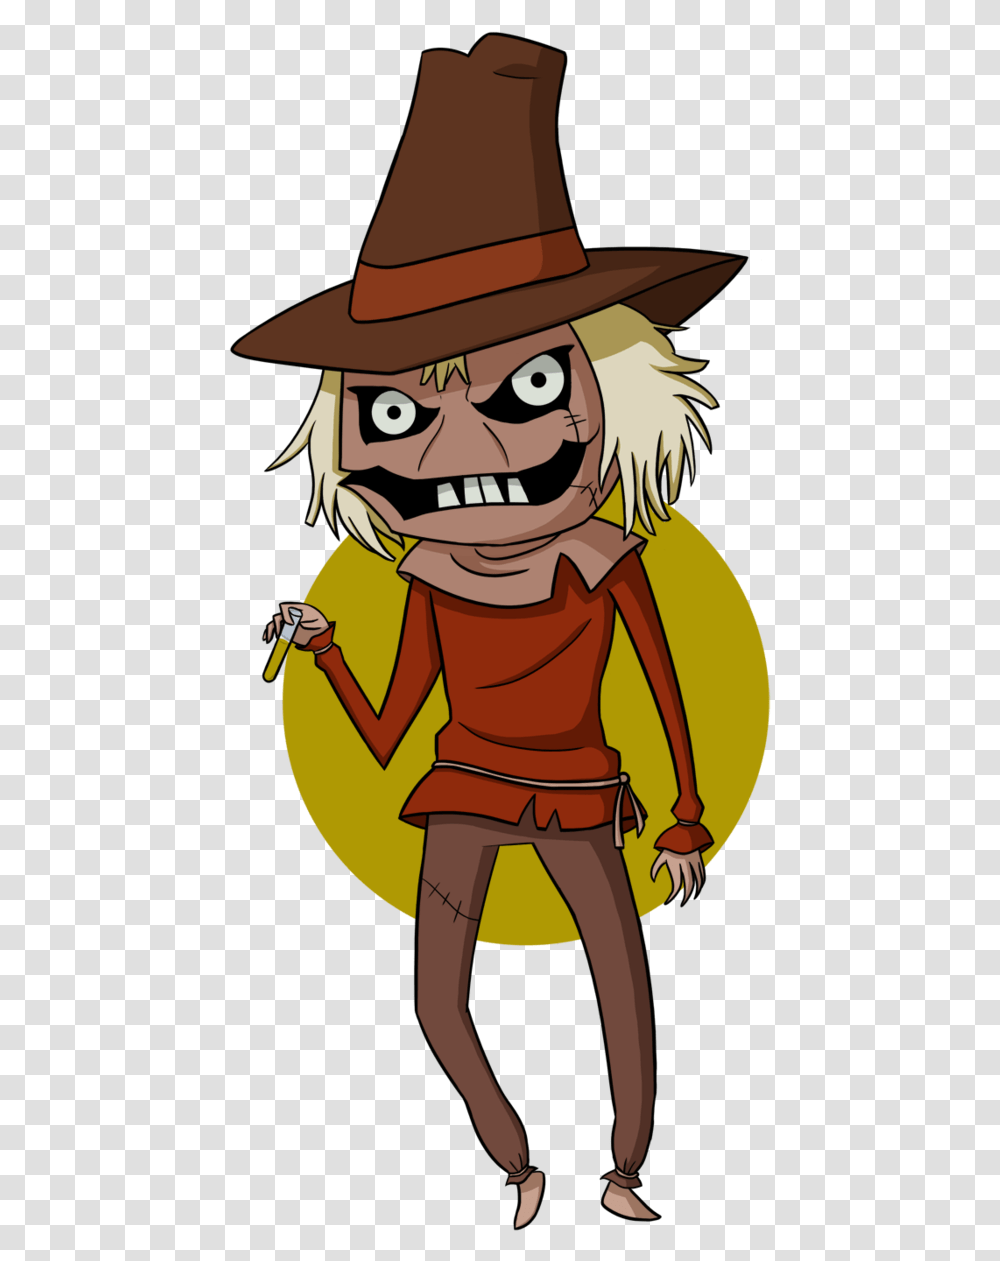 Scarecrow Chibi By Chibitigre Animated Series Scarecrow Scarecrow Batman Animated Series, Hat, Clothing, Apparel, Comics Transparent Png